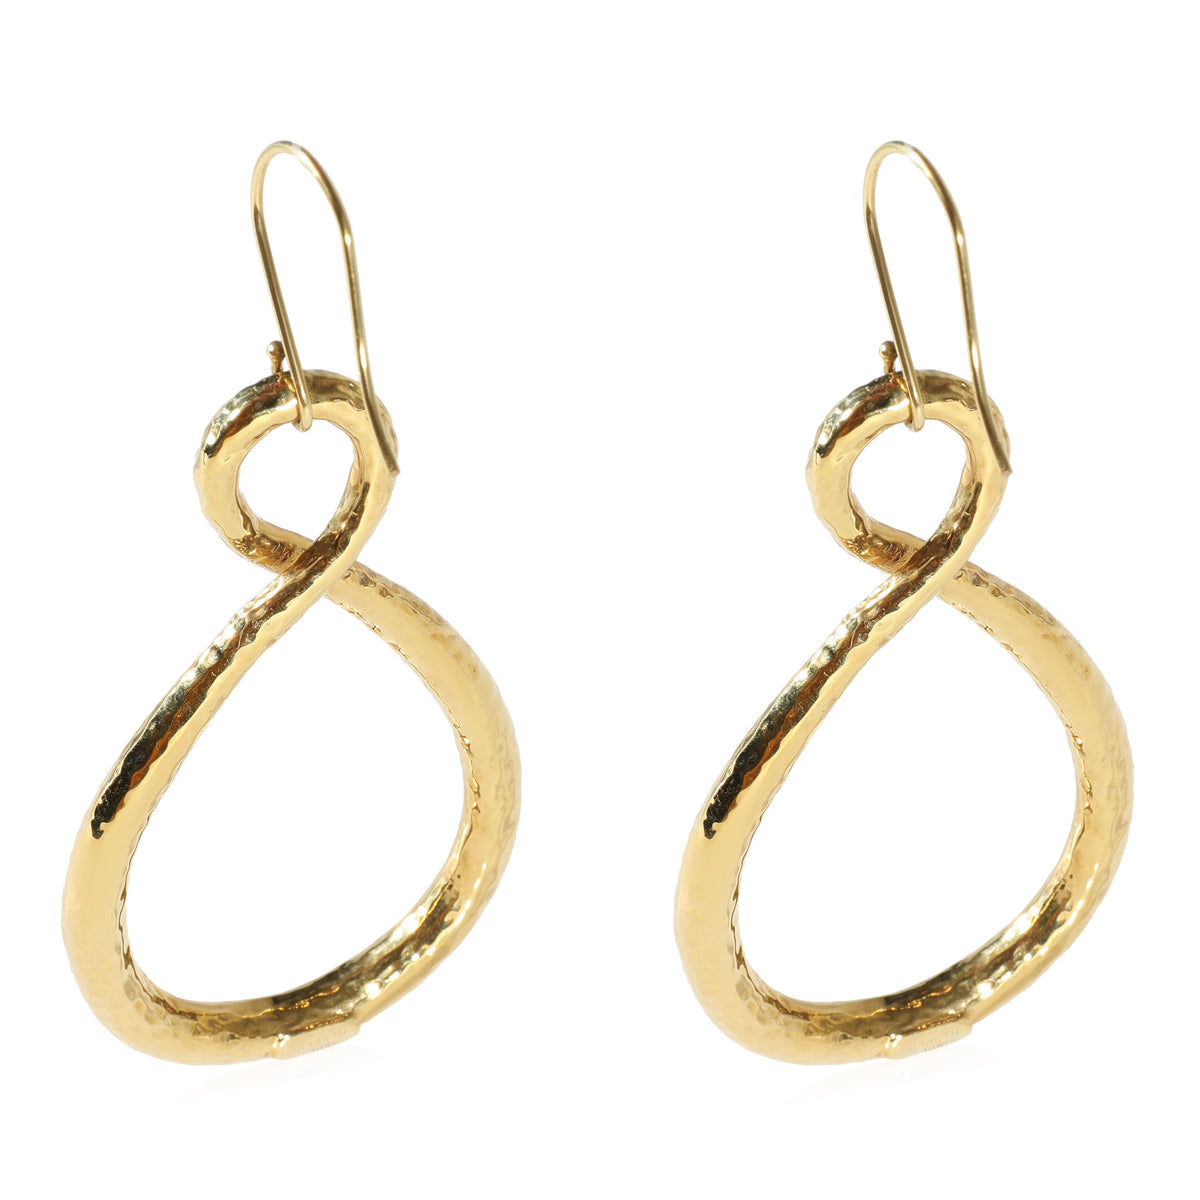 Ippolita Hammered Twisted Hoop Earrings in 18k Yellow Gold